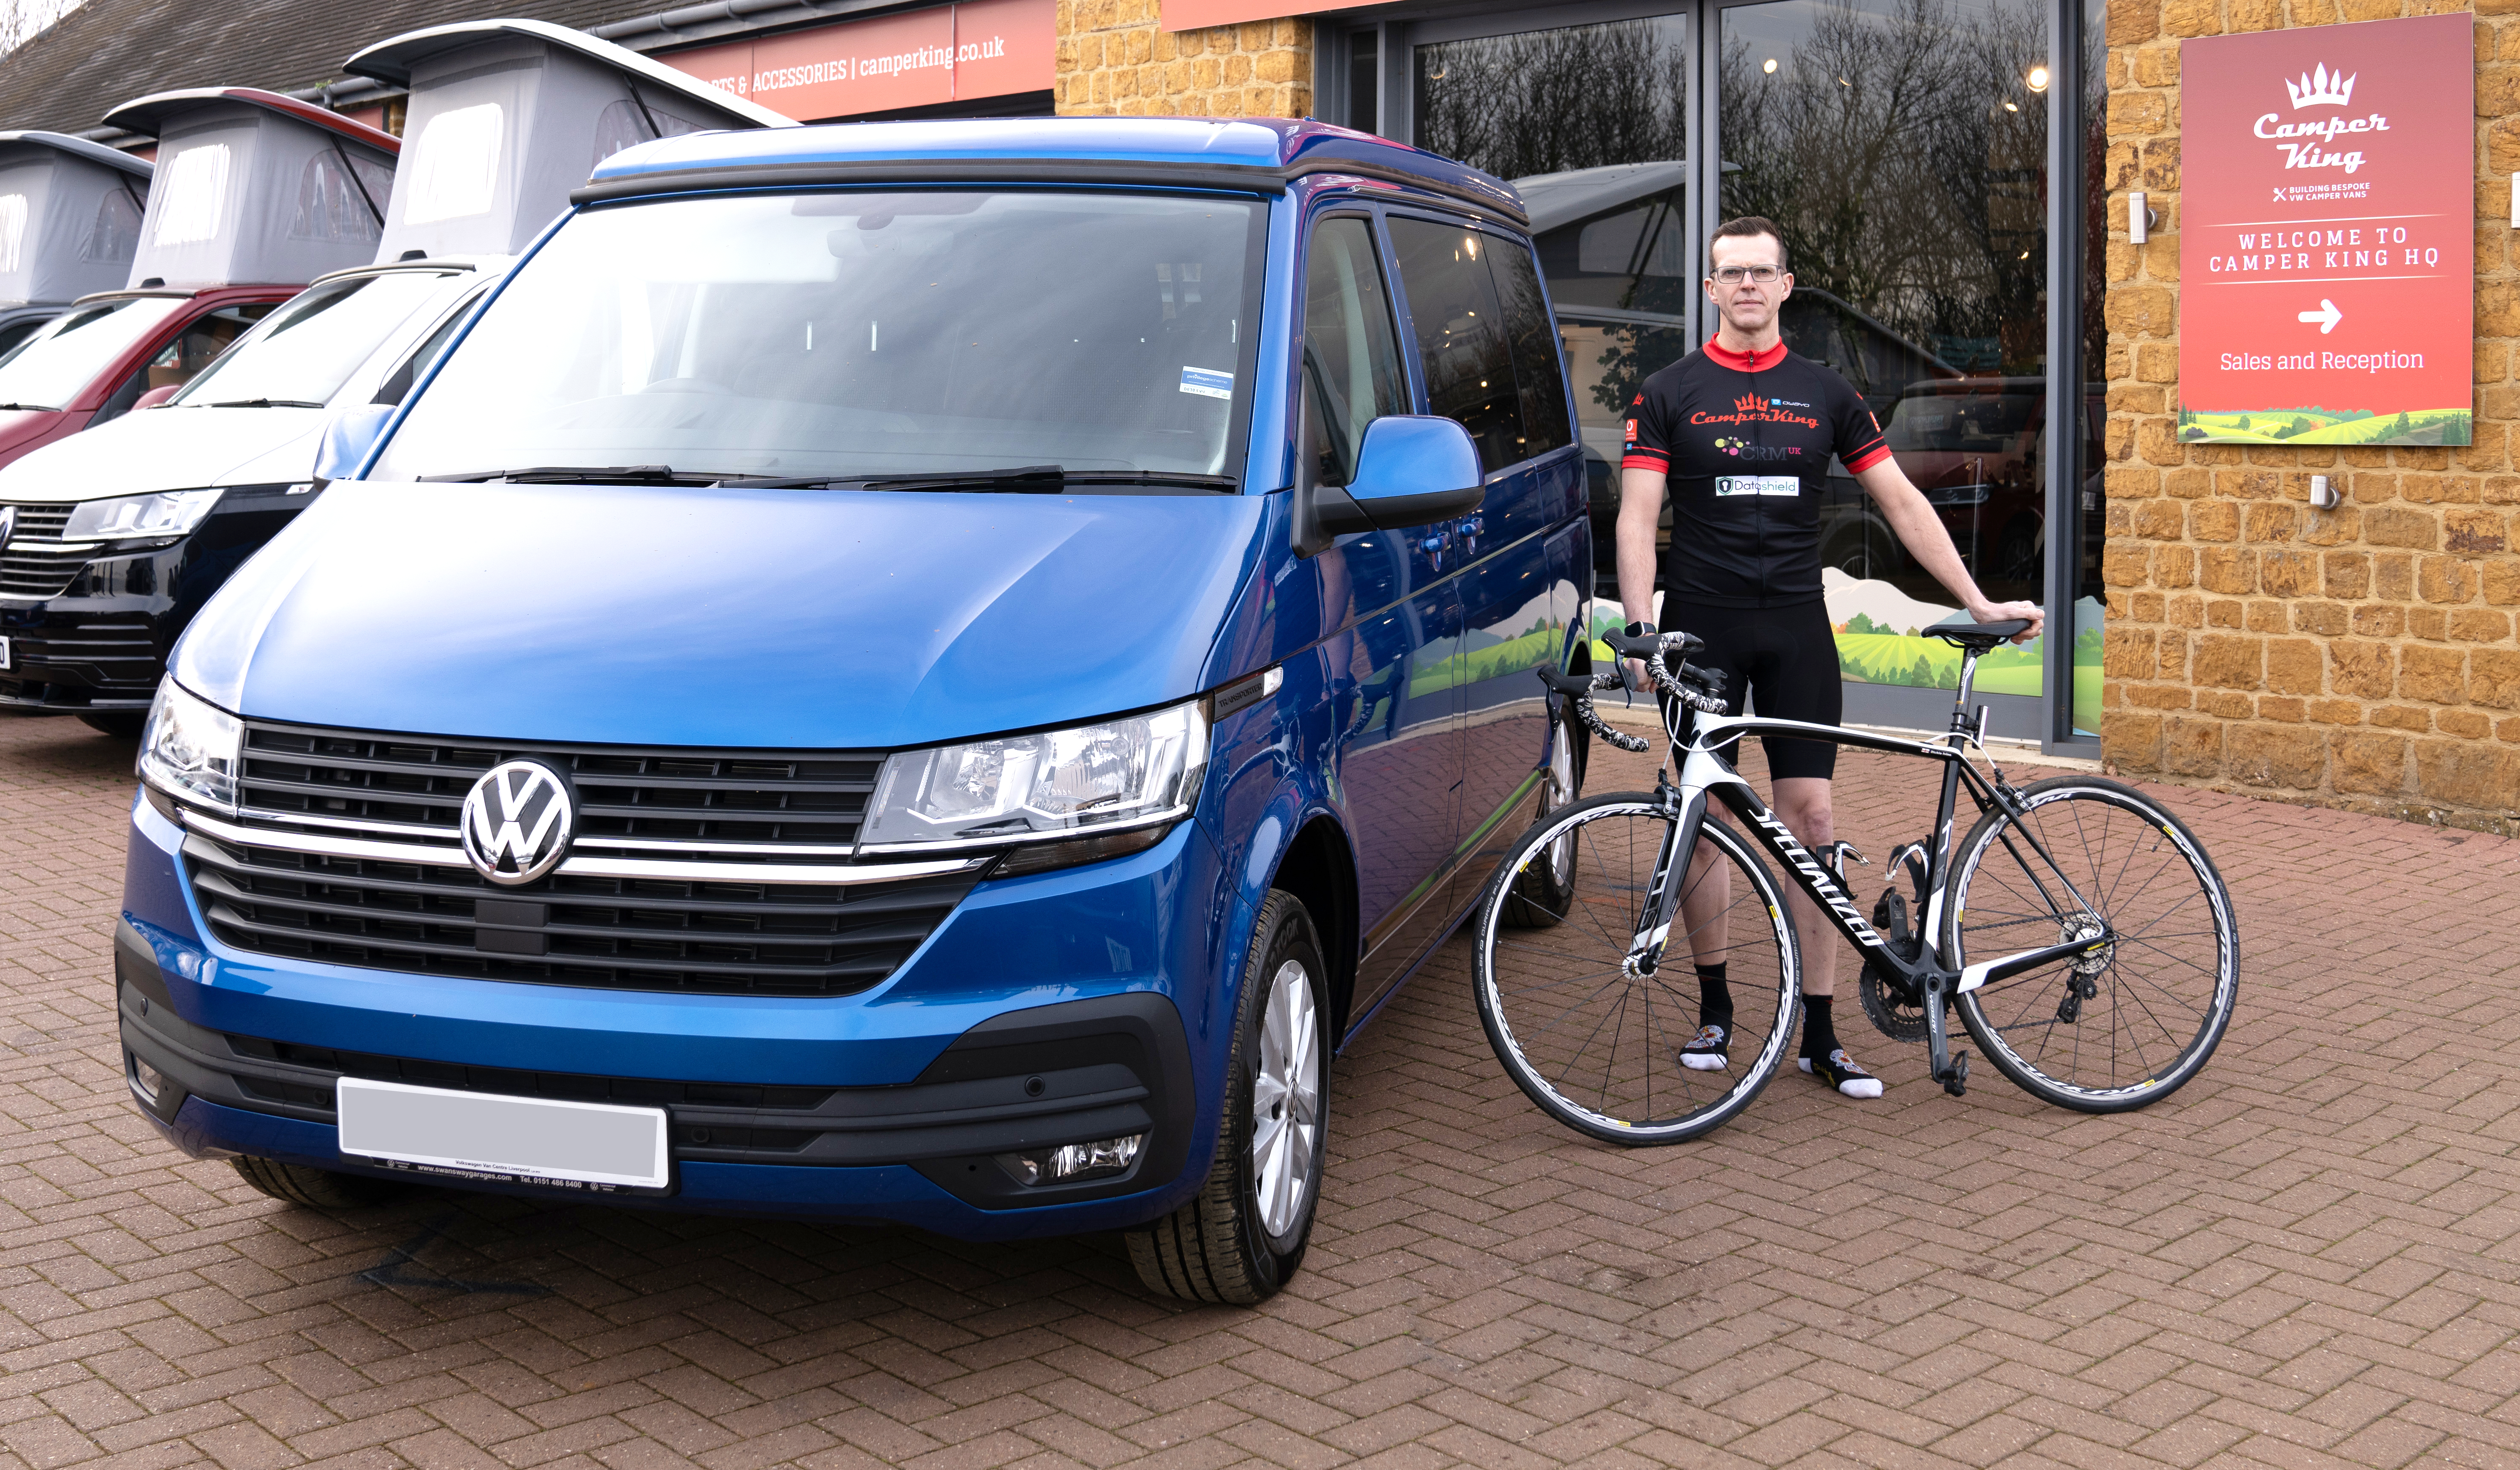 CamperKing donates campervan rental for customer's epic fundraising cycle ride